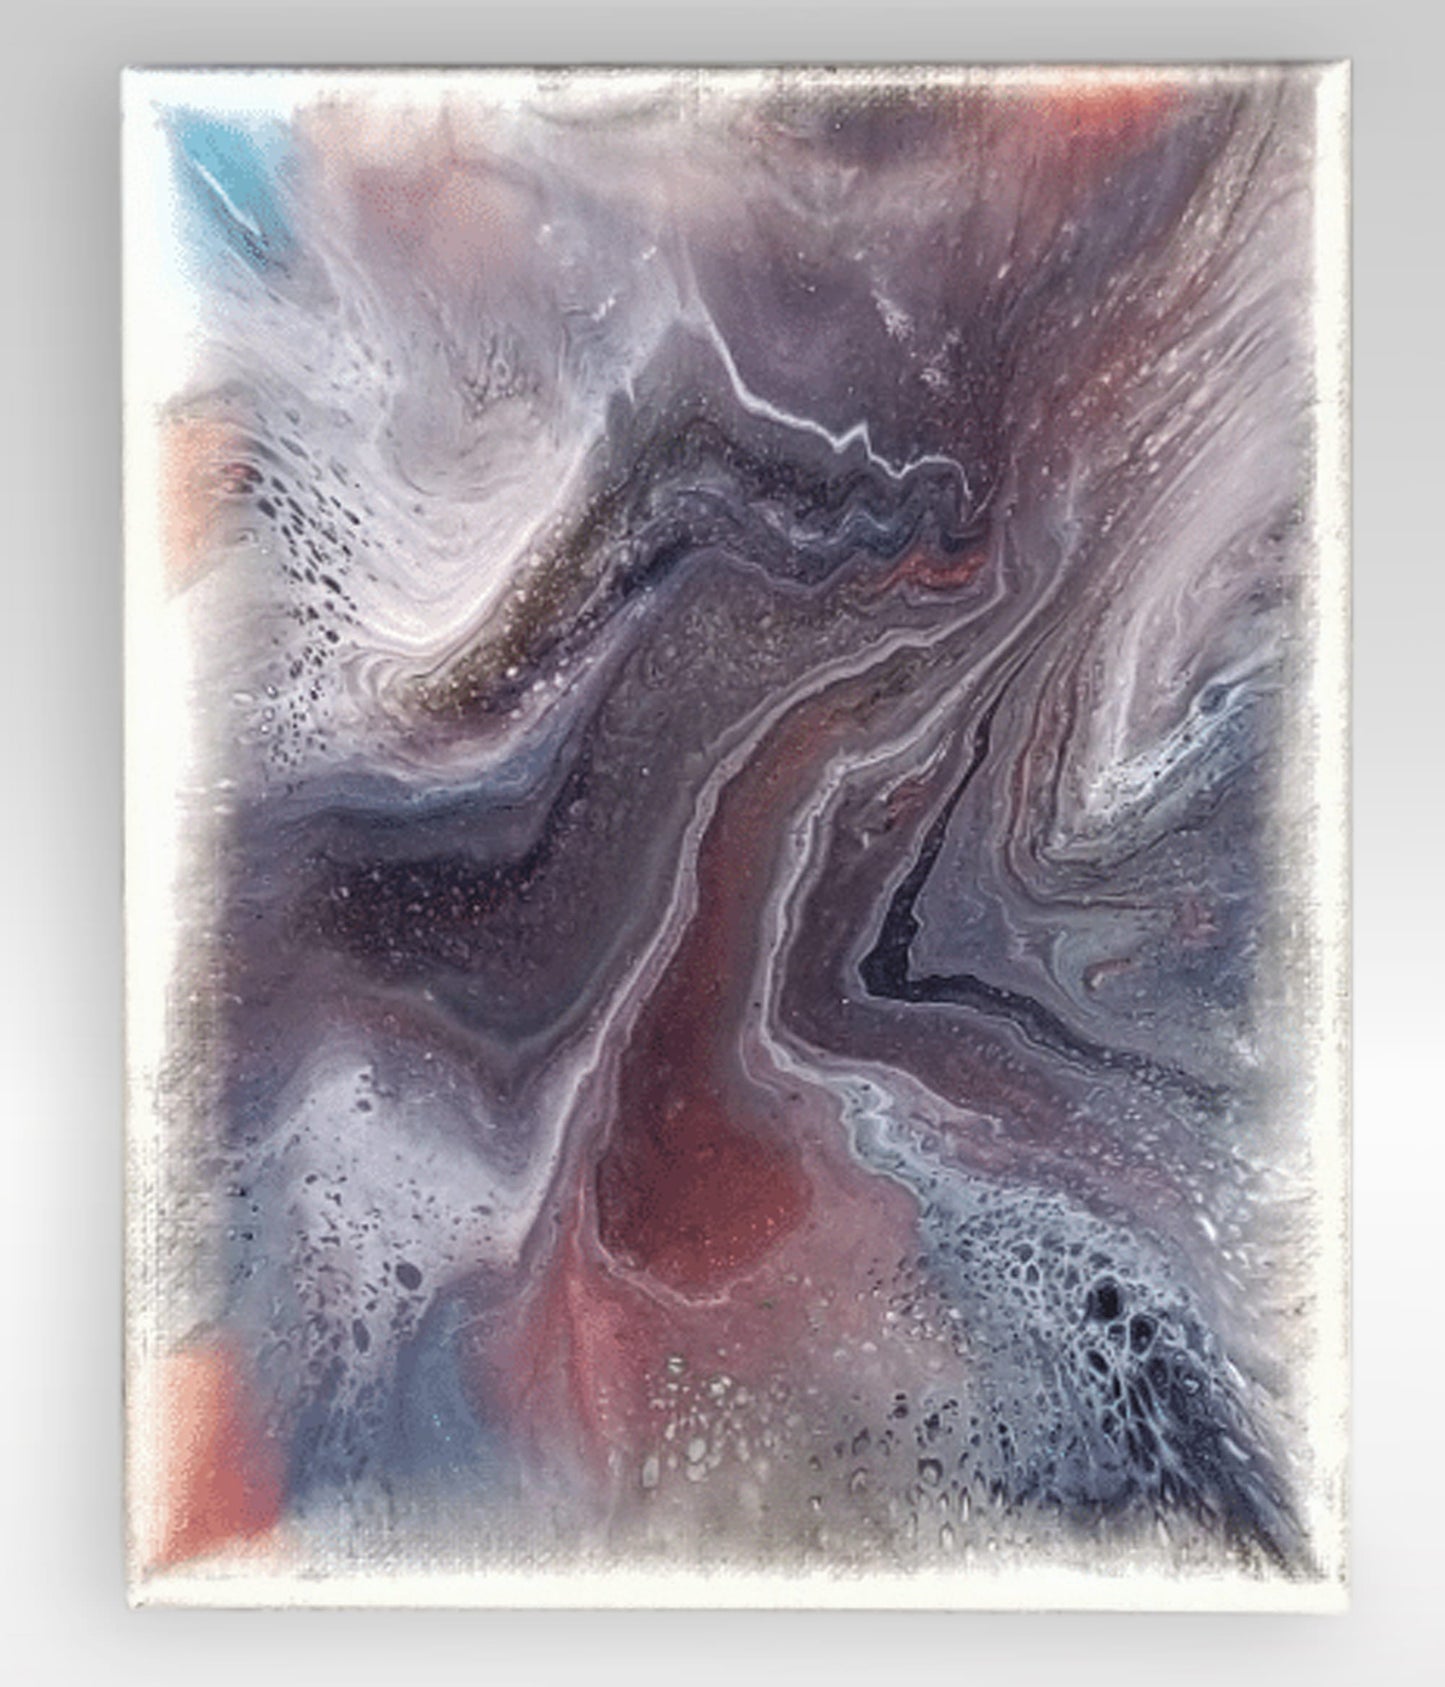 Burrow – 8 x 10 Resin Painting On Canvas